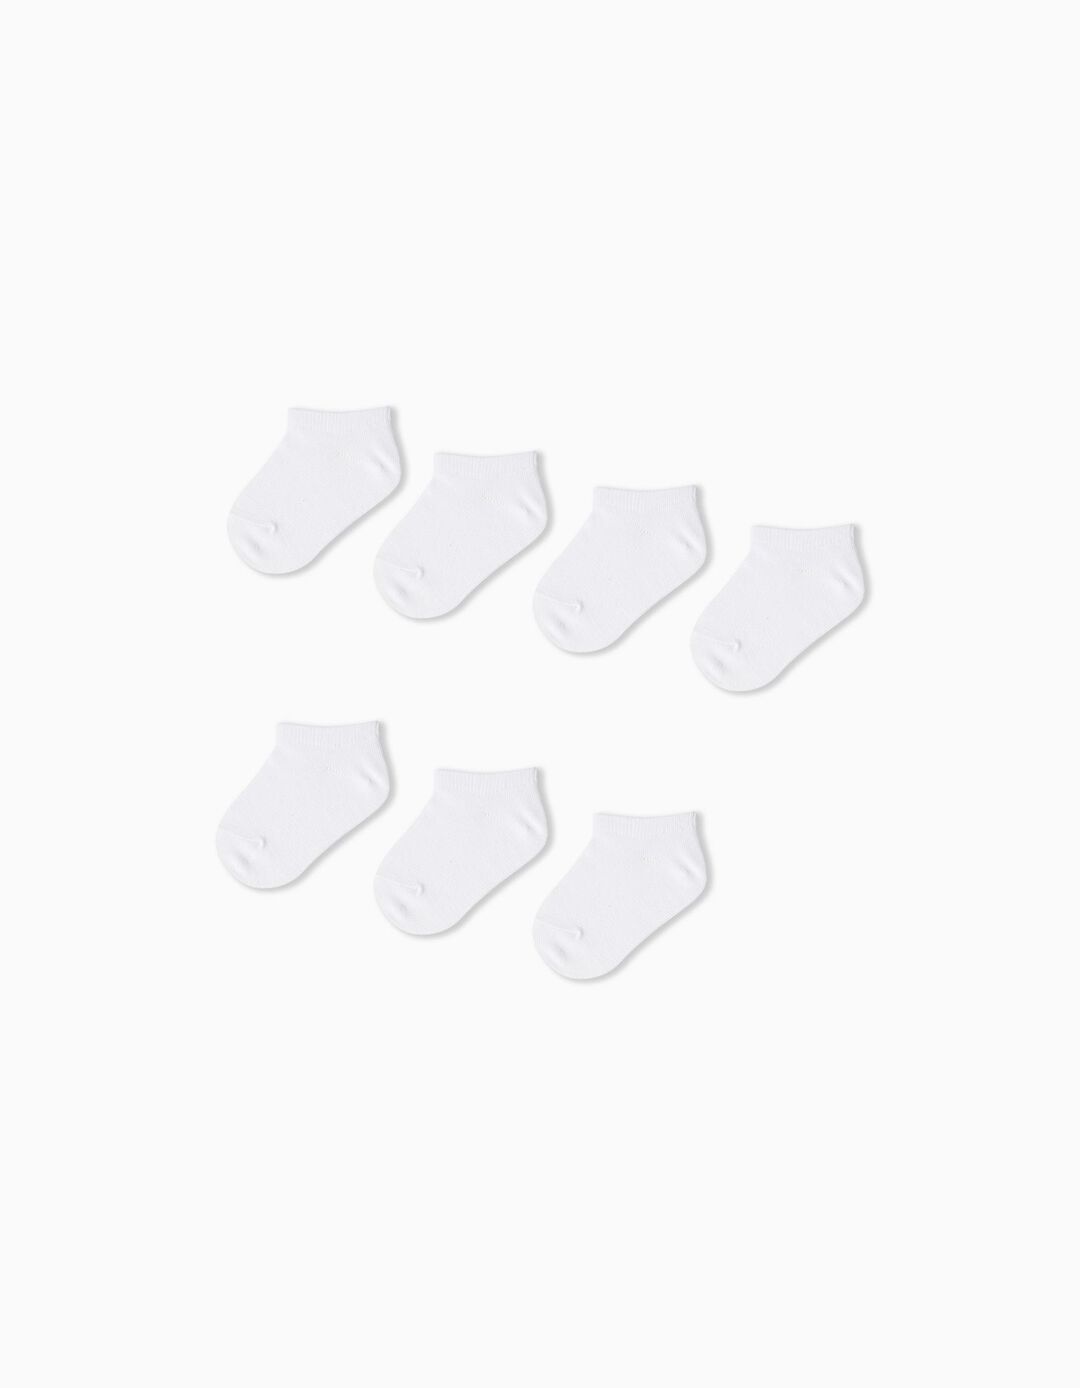 7 Pairs of Ankle Socks Pack, Baby Girls, White